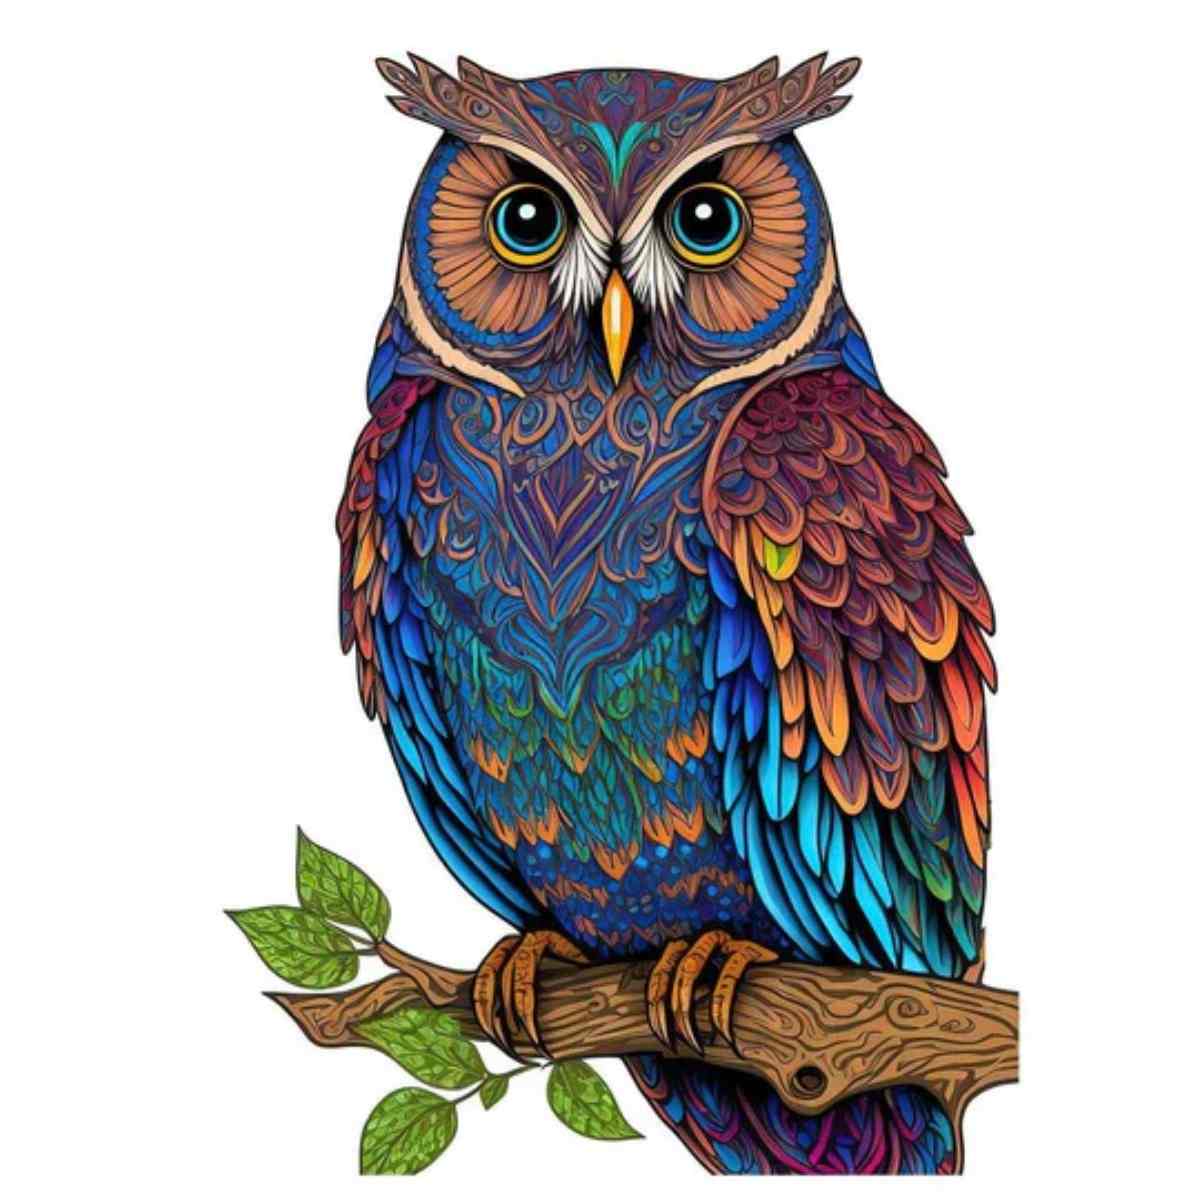 Animal Jigsaw Puzzle > Wooden Jigsaw Puzzle > Jigsaw Puzzle A5 Wisdom Owl - Jigsaw Puzzle